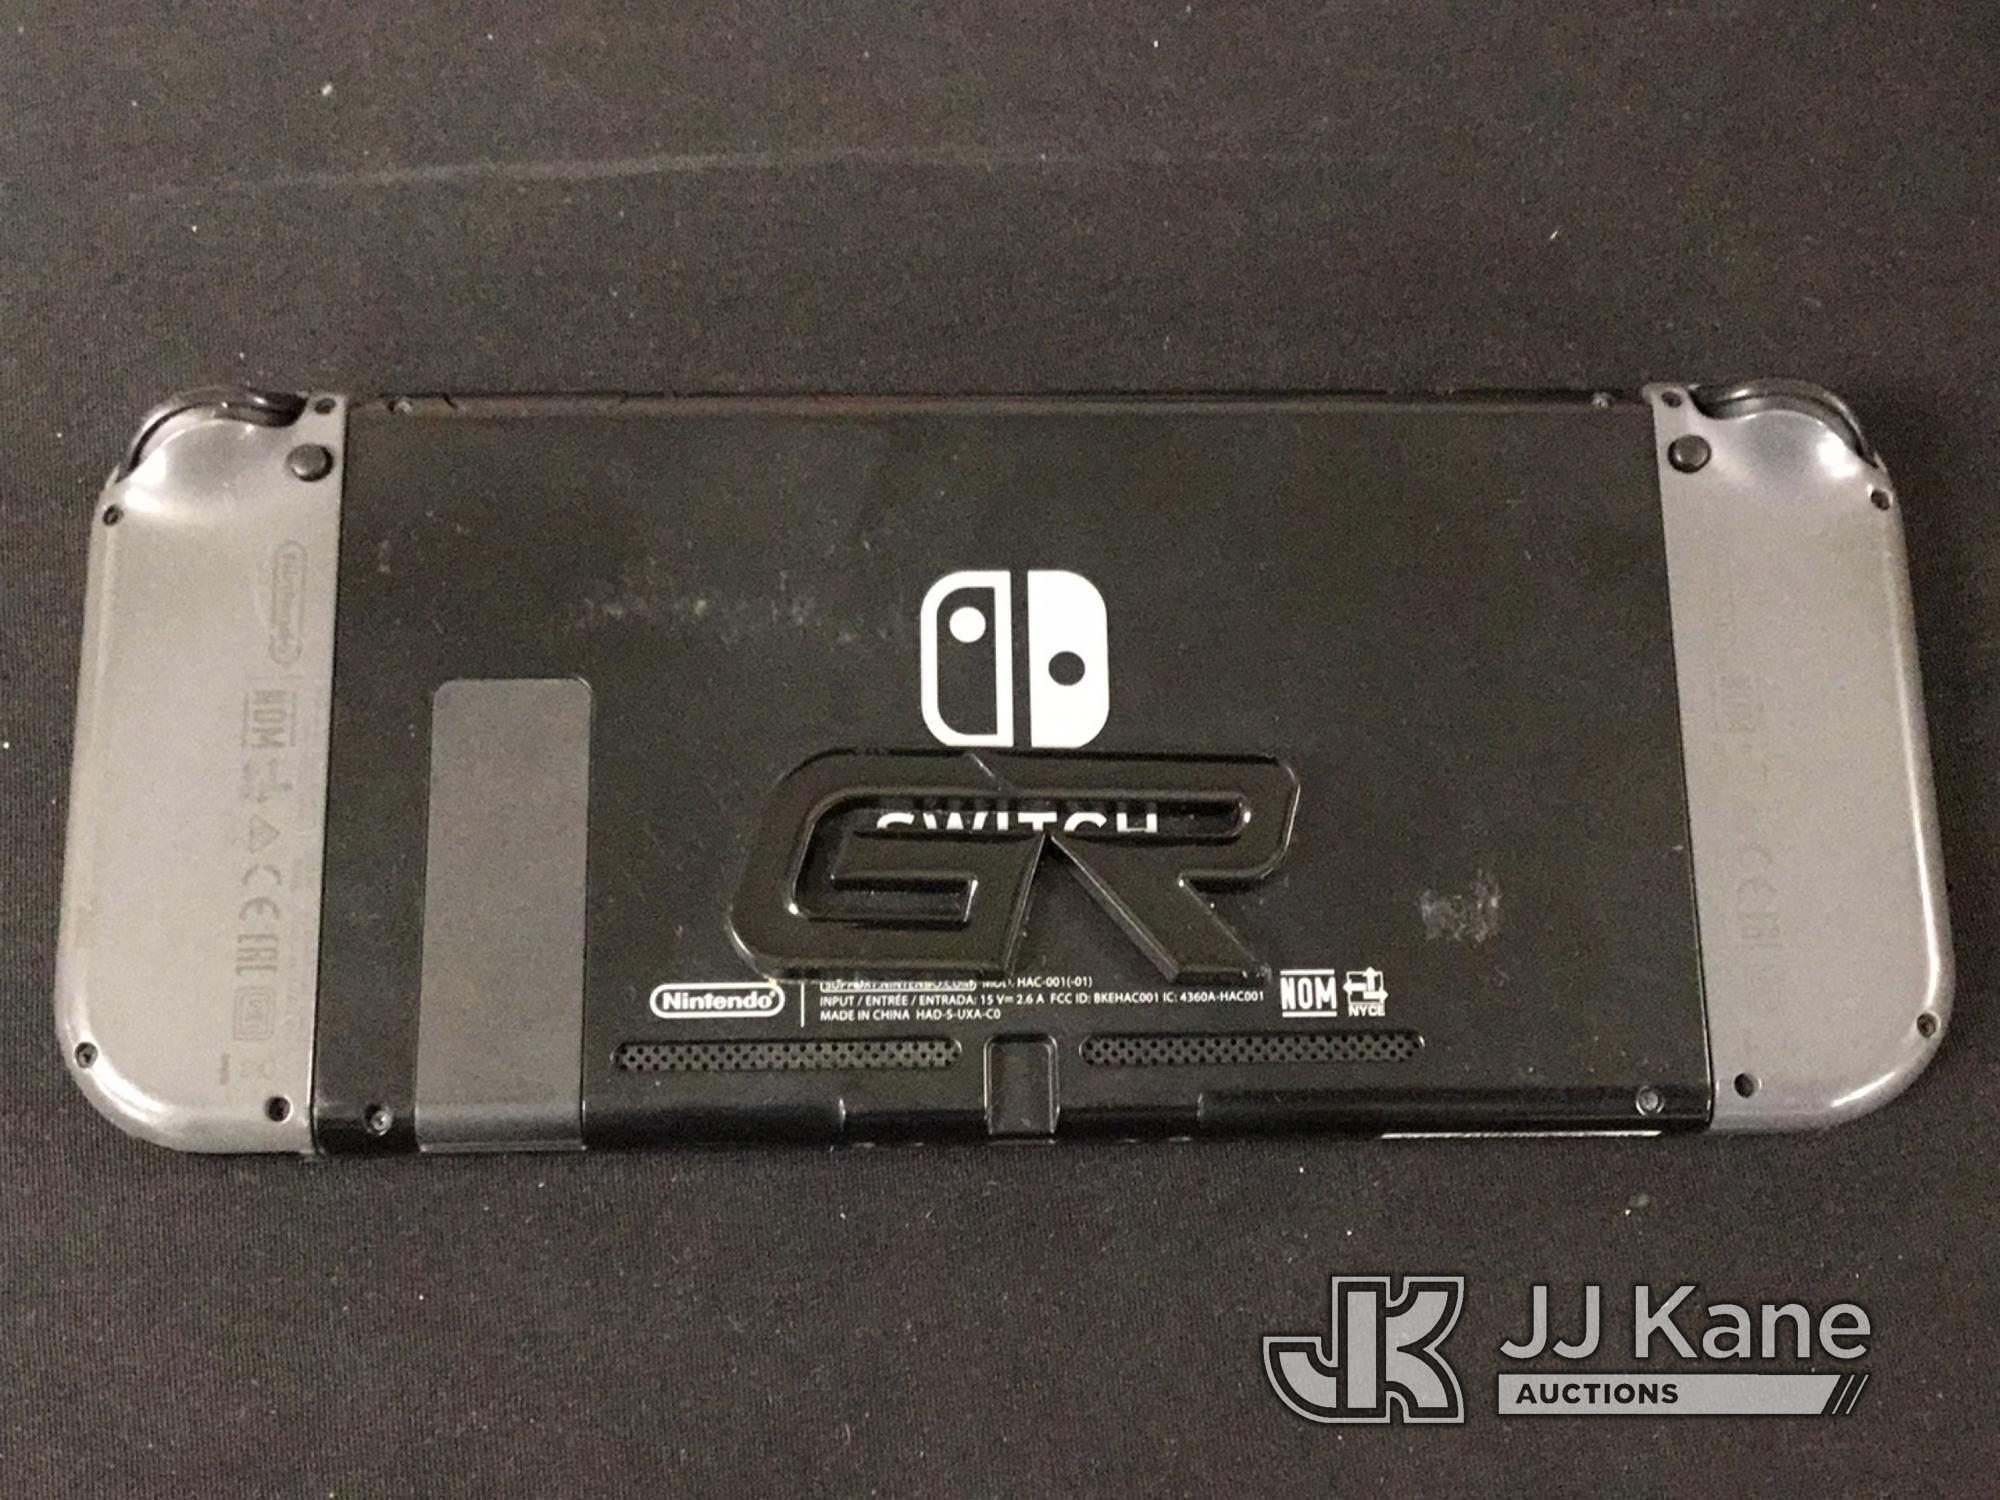 (Jurupa Valley, CA) Nintendo switch | no charger (Used ) NOTE: This unit is being sold AS IS/WHERE I